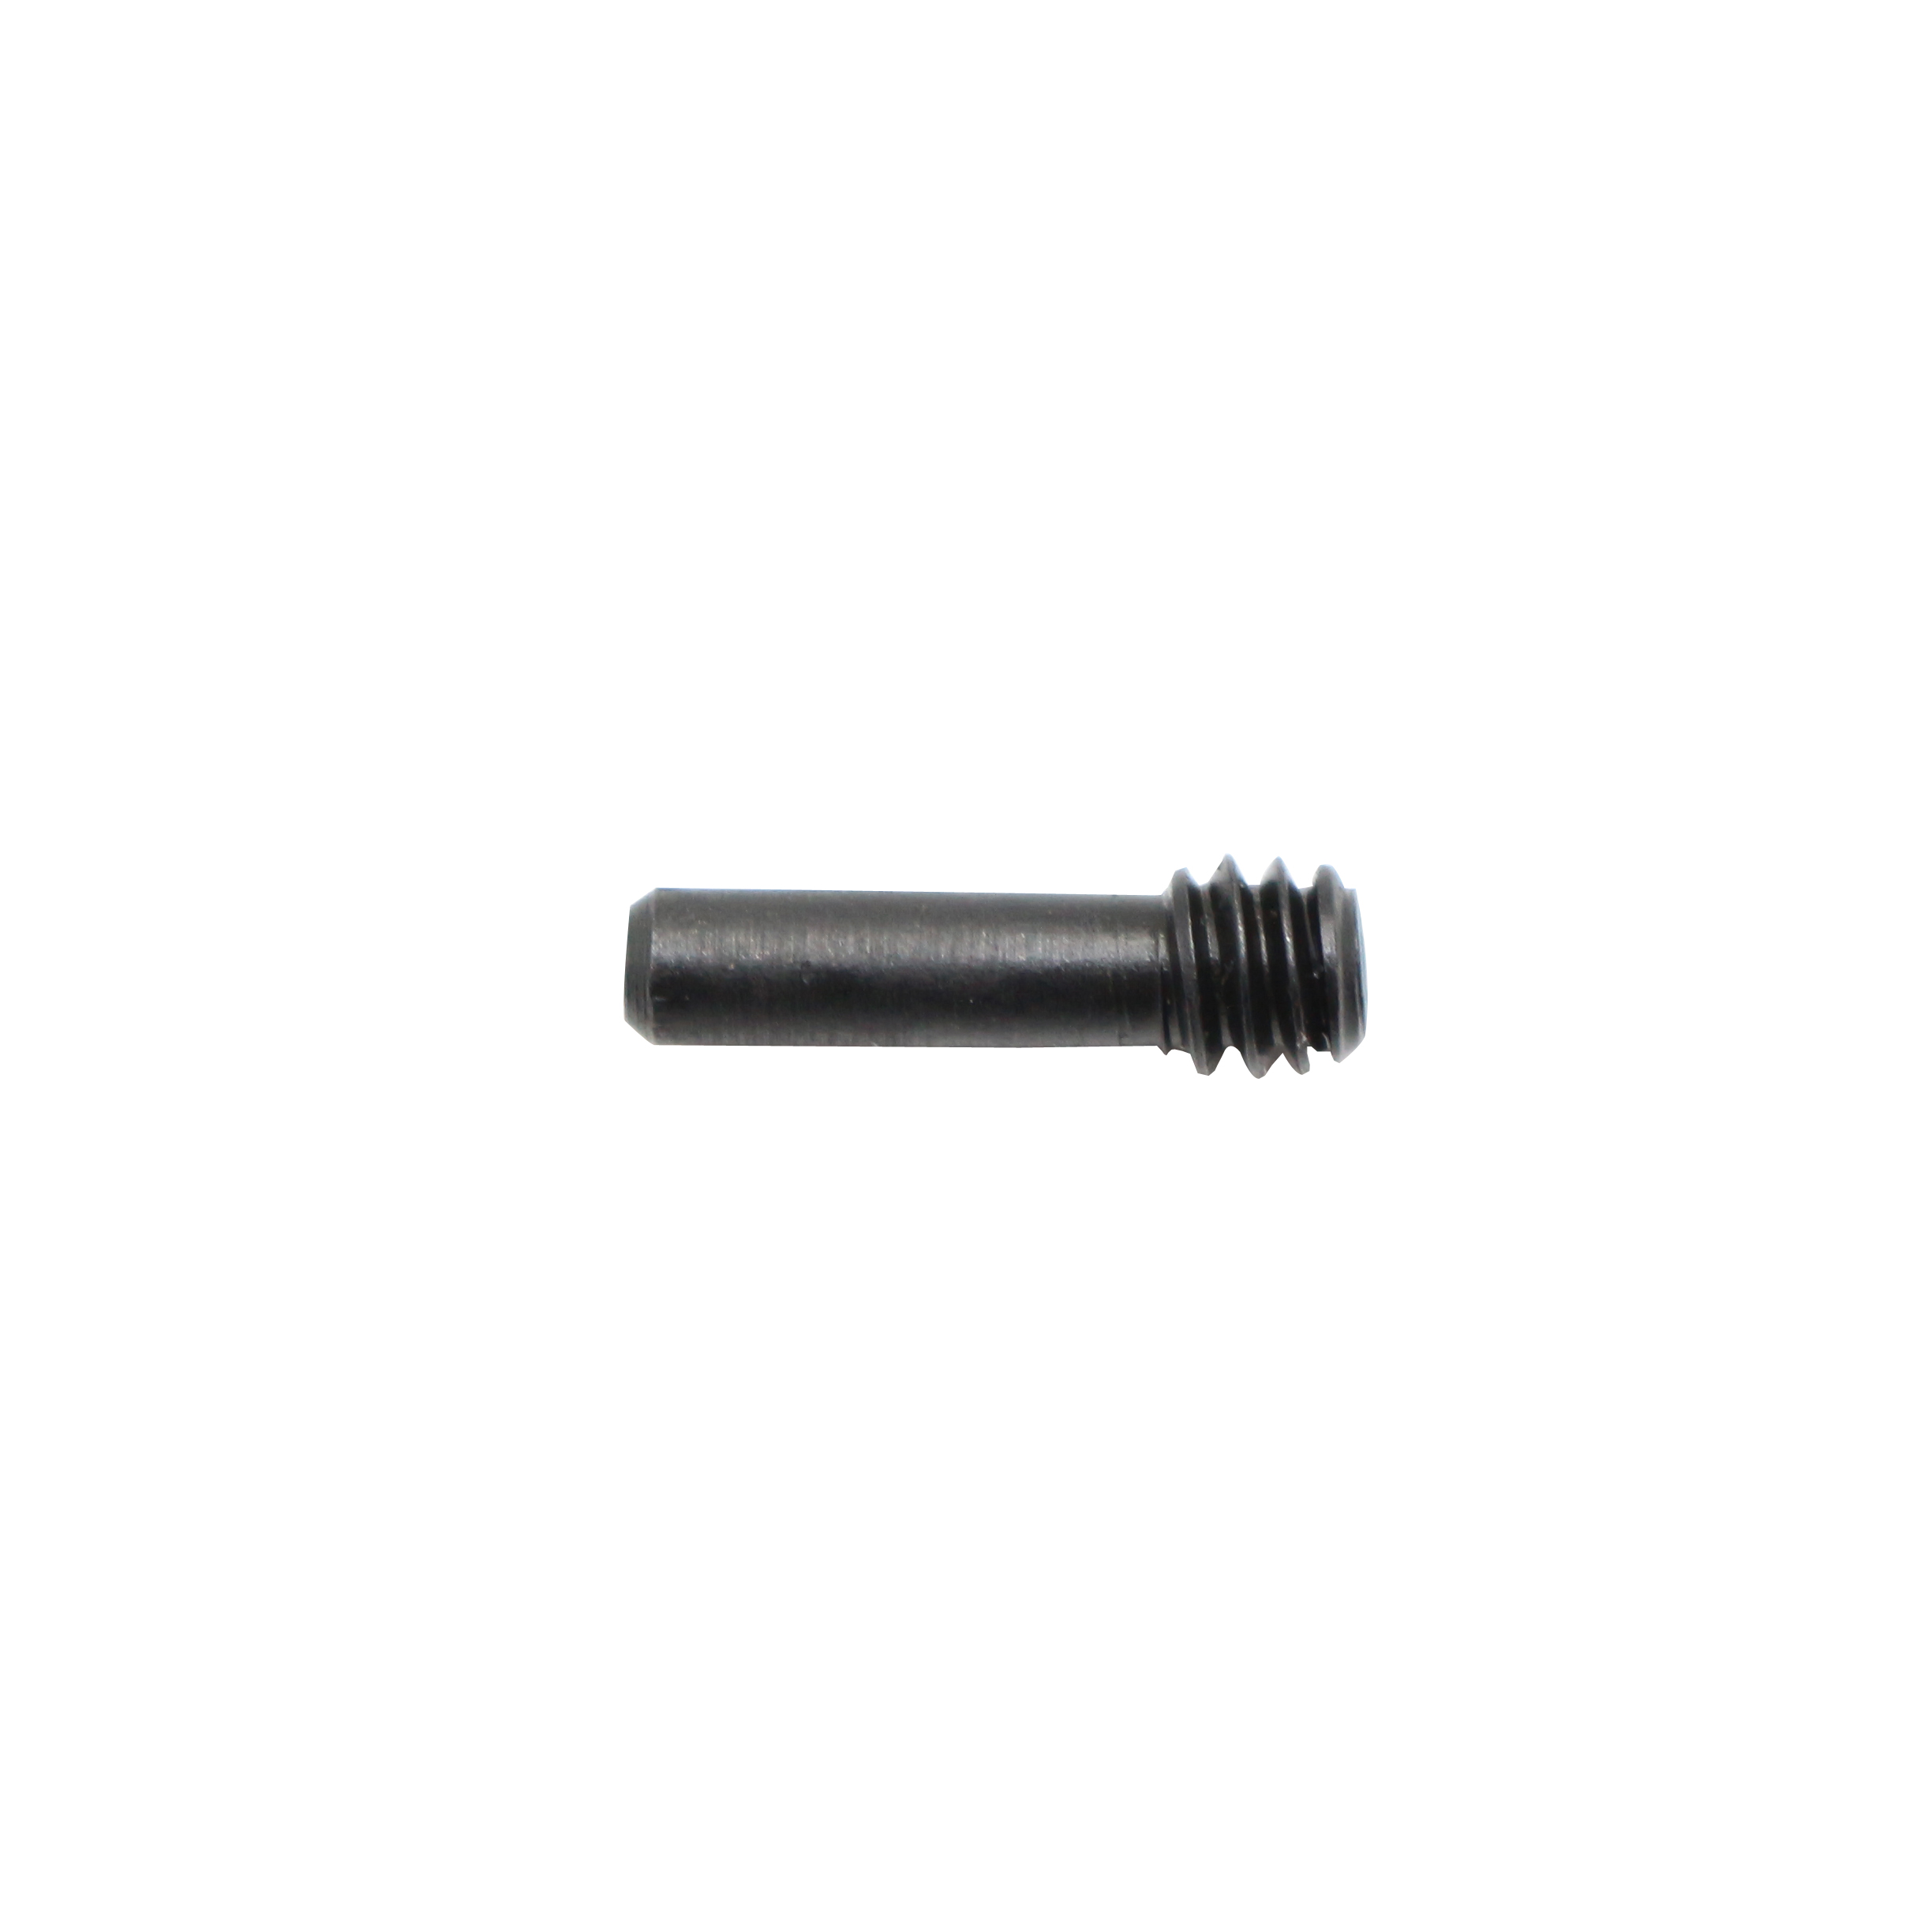 Features: AR-10 / LR-308 DPMS Compatible Steel Mil-Spec Part Great for New ...